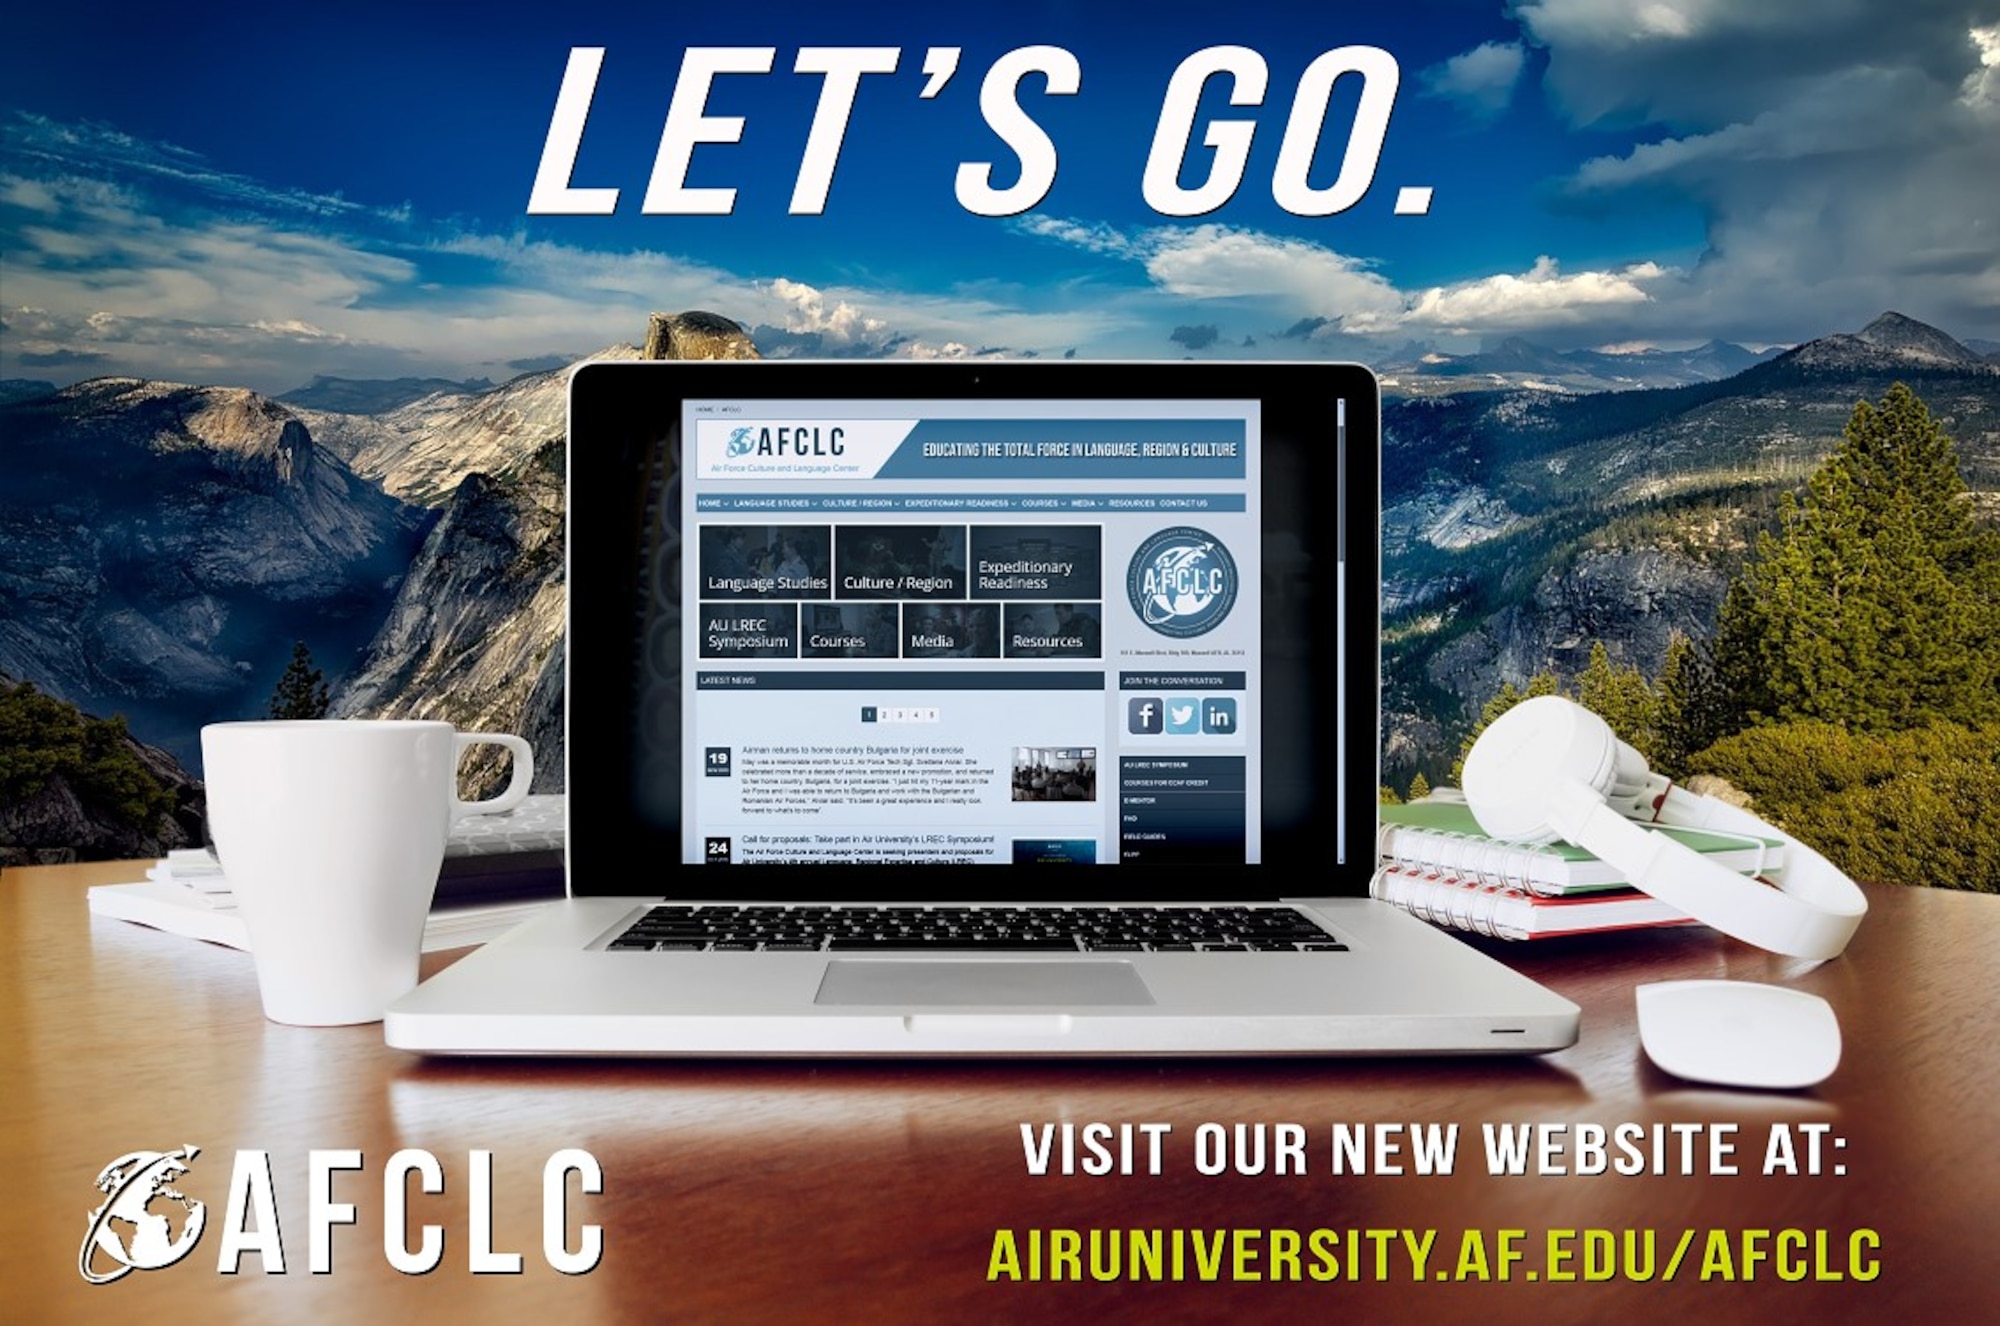 On November 29, the Air Force Culture and Language Center debuted its new website which is now hosted by the American Forces Public Information Management System (AFPIMS).